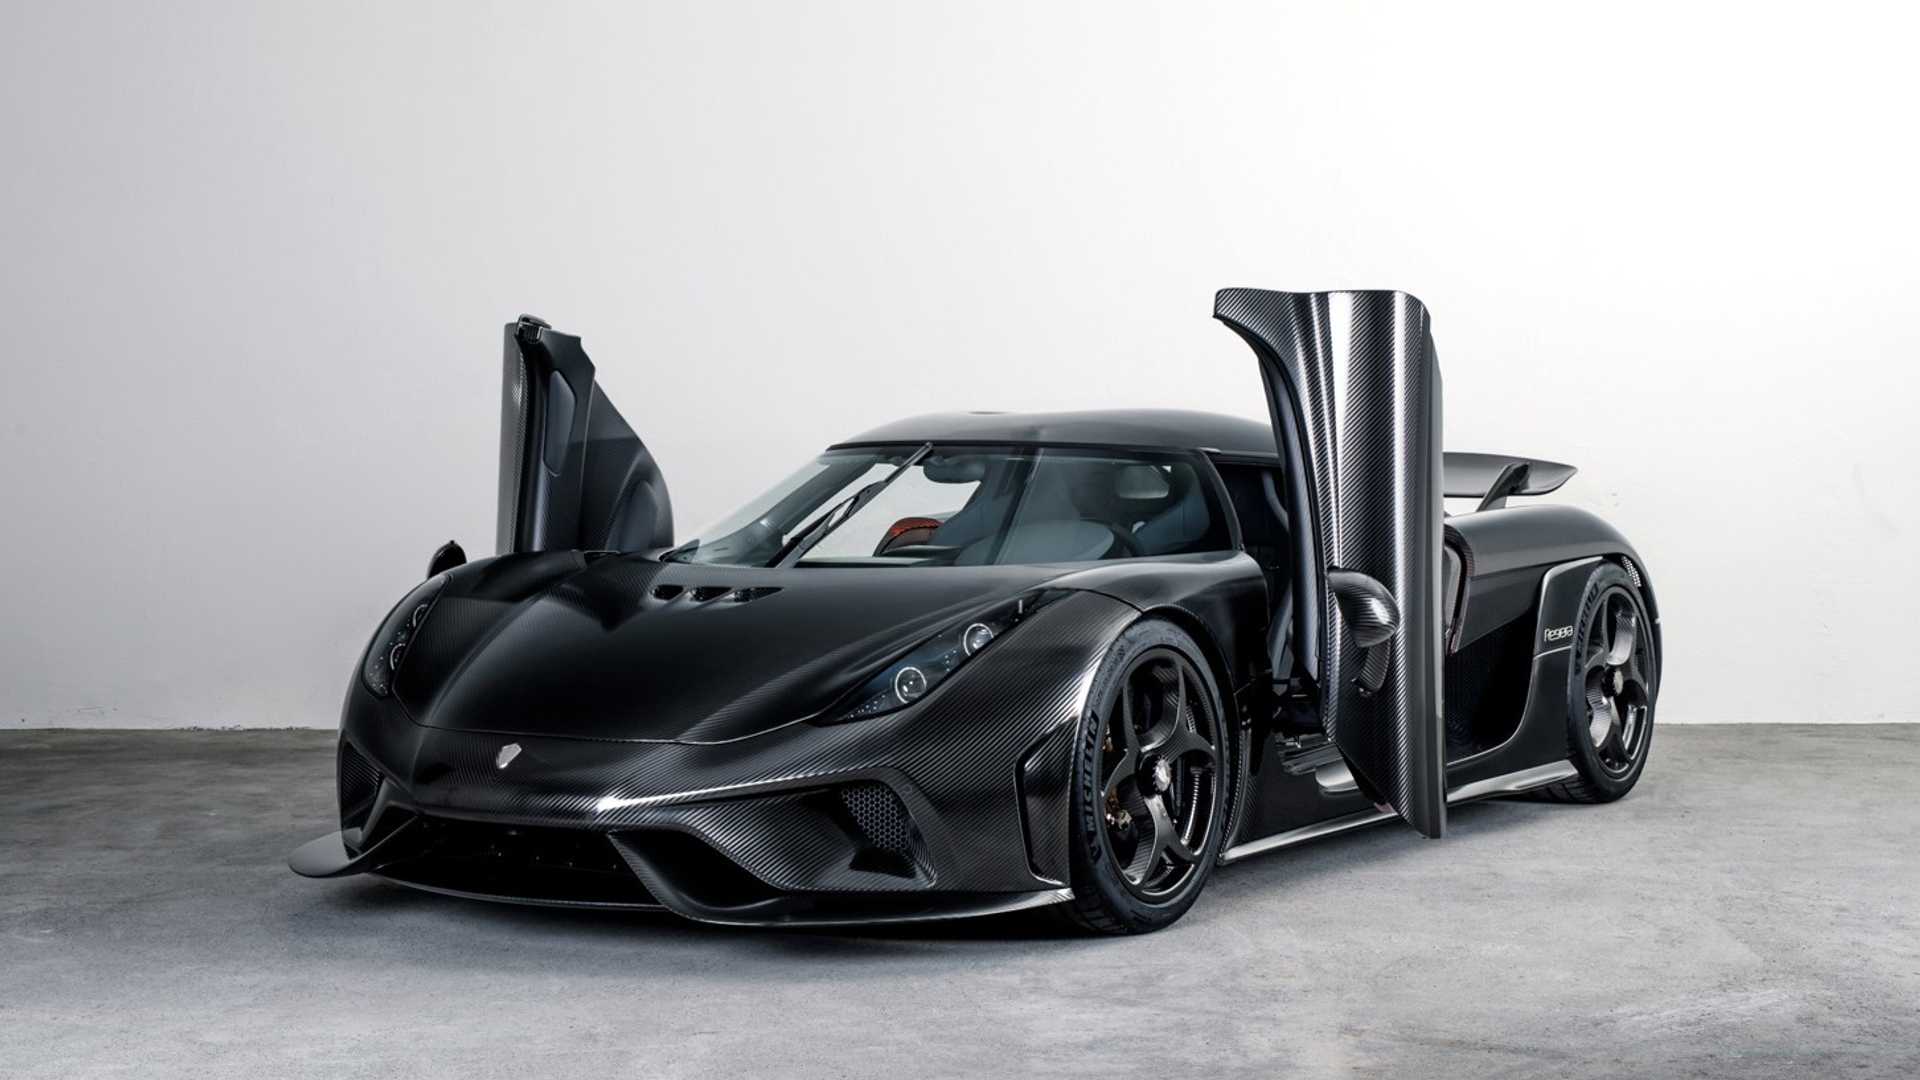 Wish to Buy a Koenigsegg Regera? Here's your Chance Supercar Blog